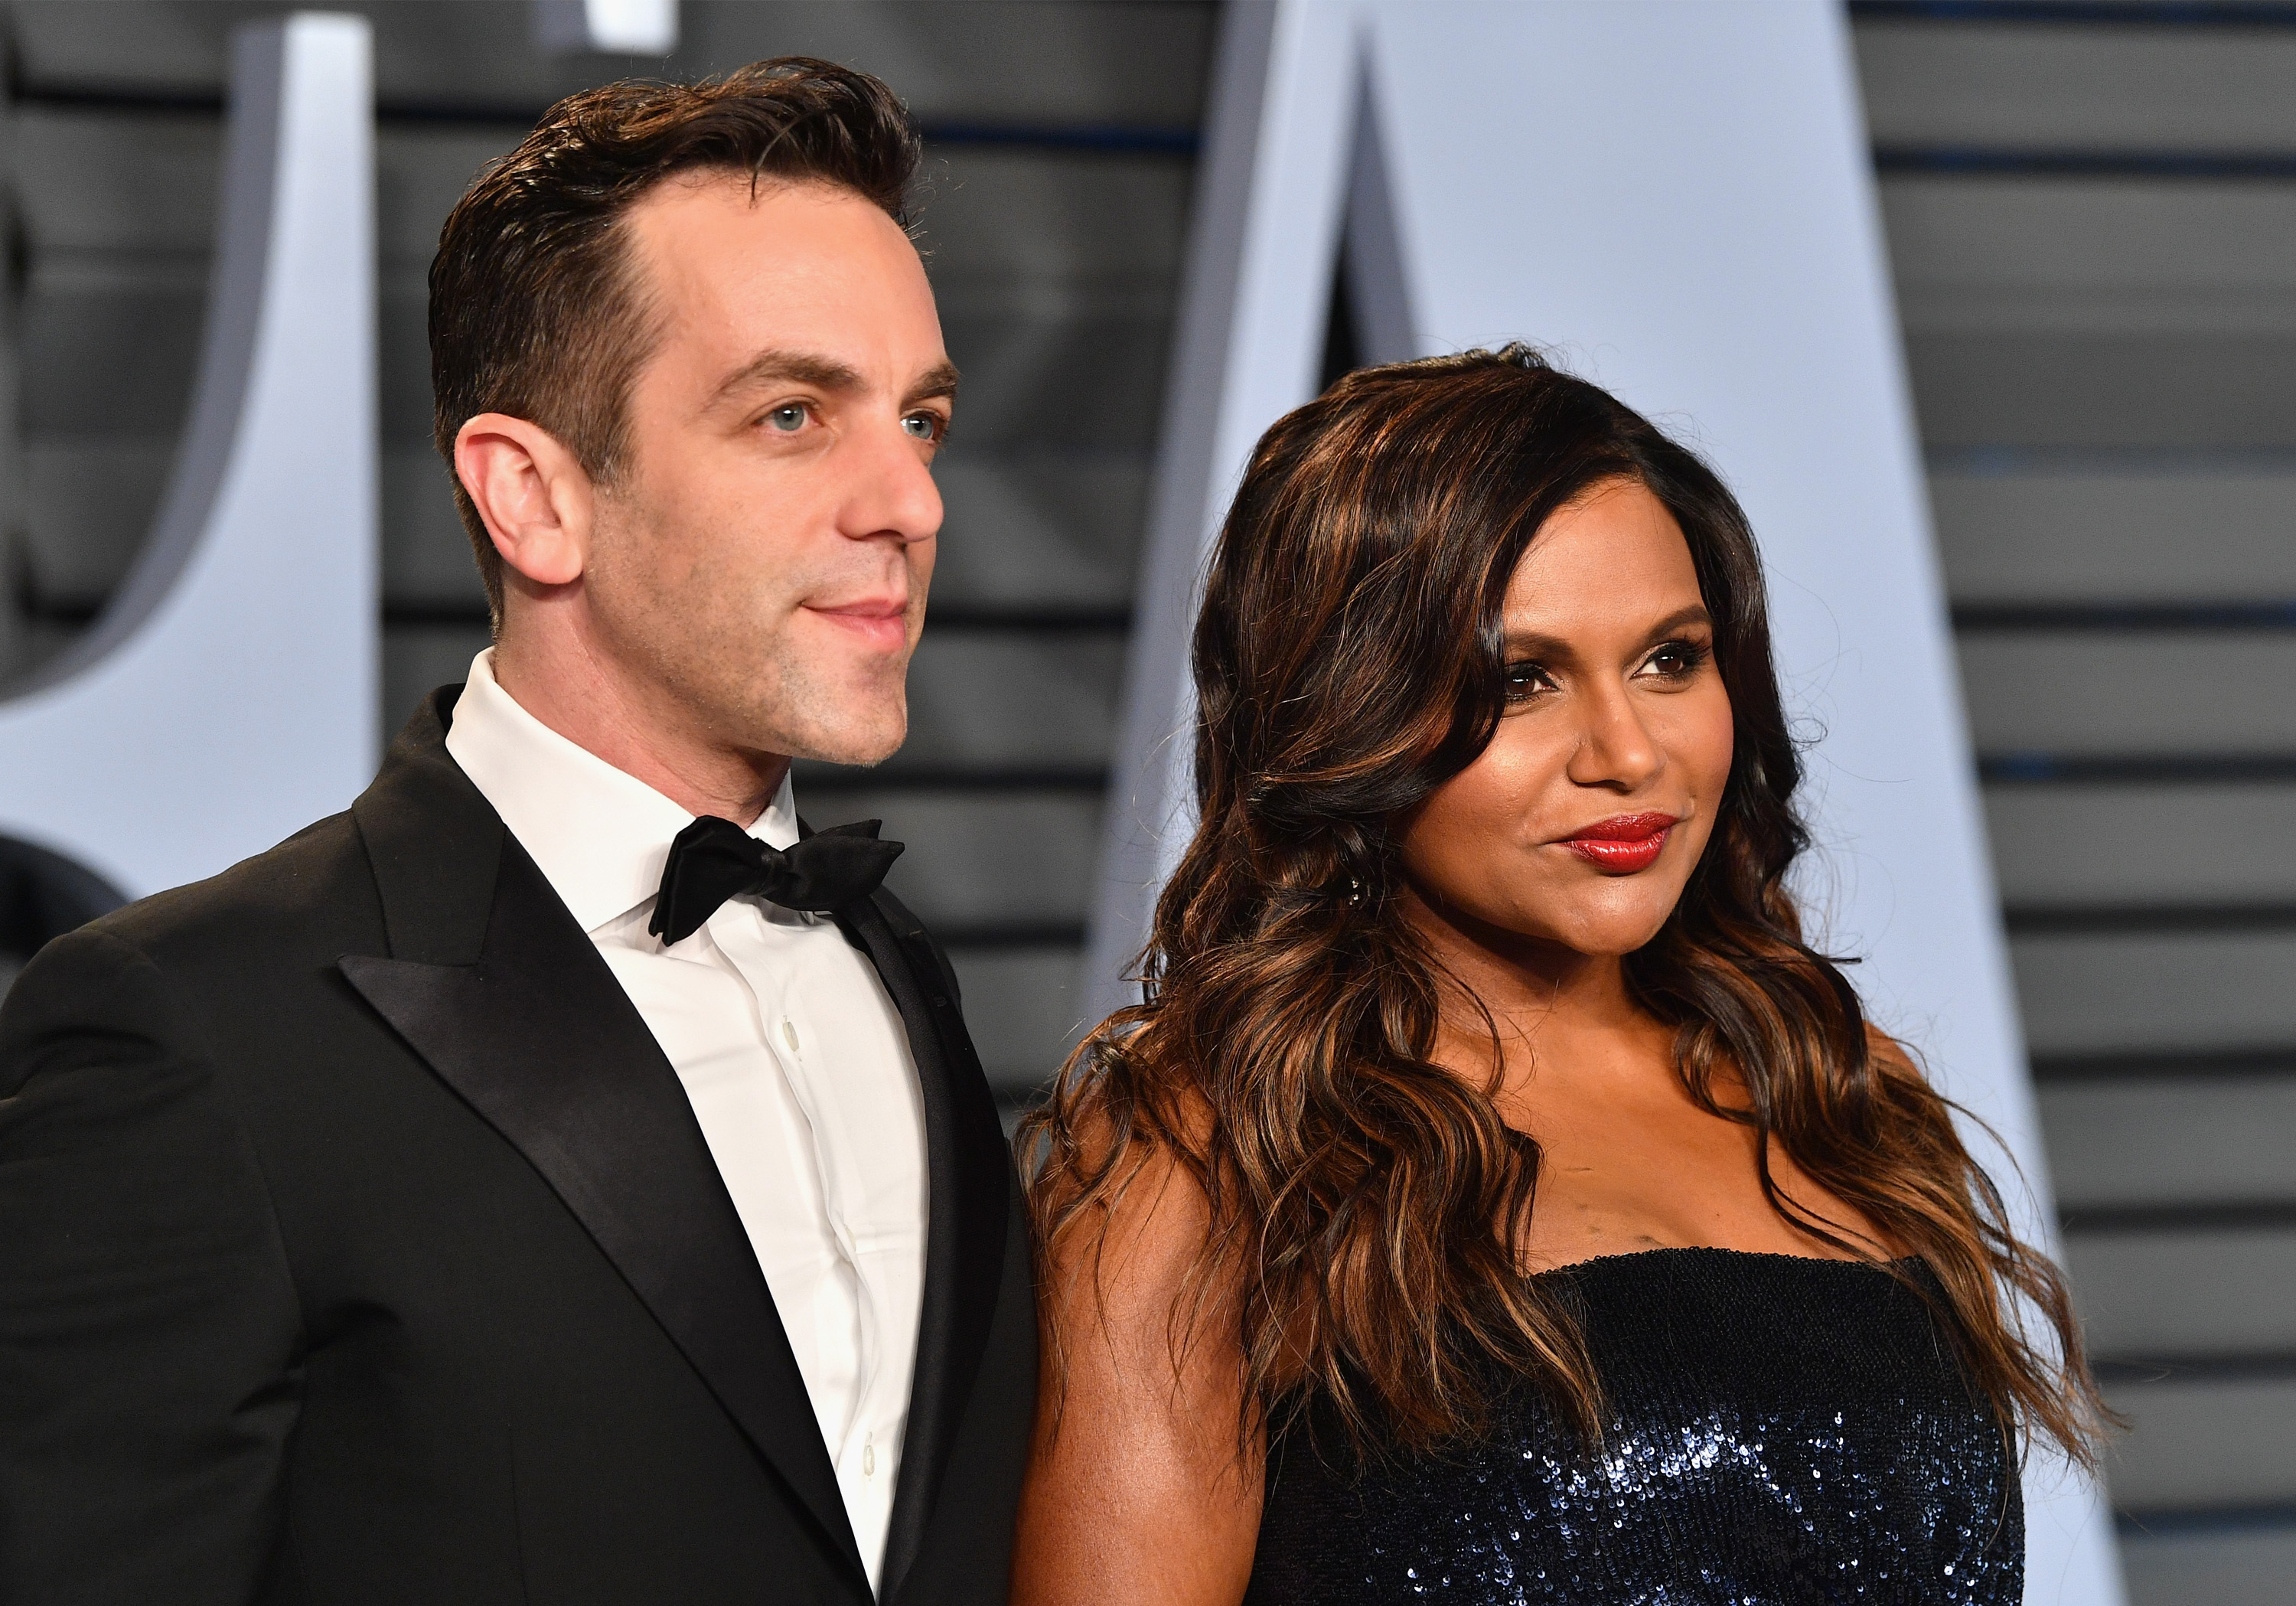 BJ Novak (L) and Mindy Kaling attend the 2018 Vanity Fair Oscar Party on March 4, 2018 in Beverly Hills, California. 